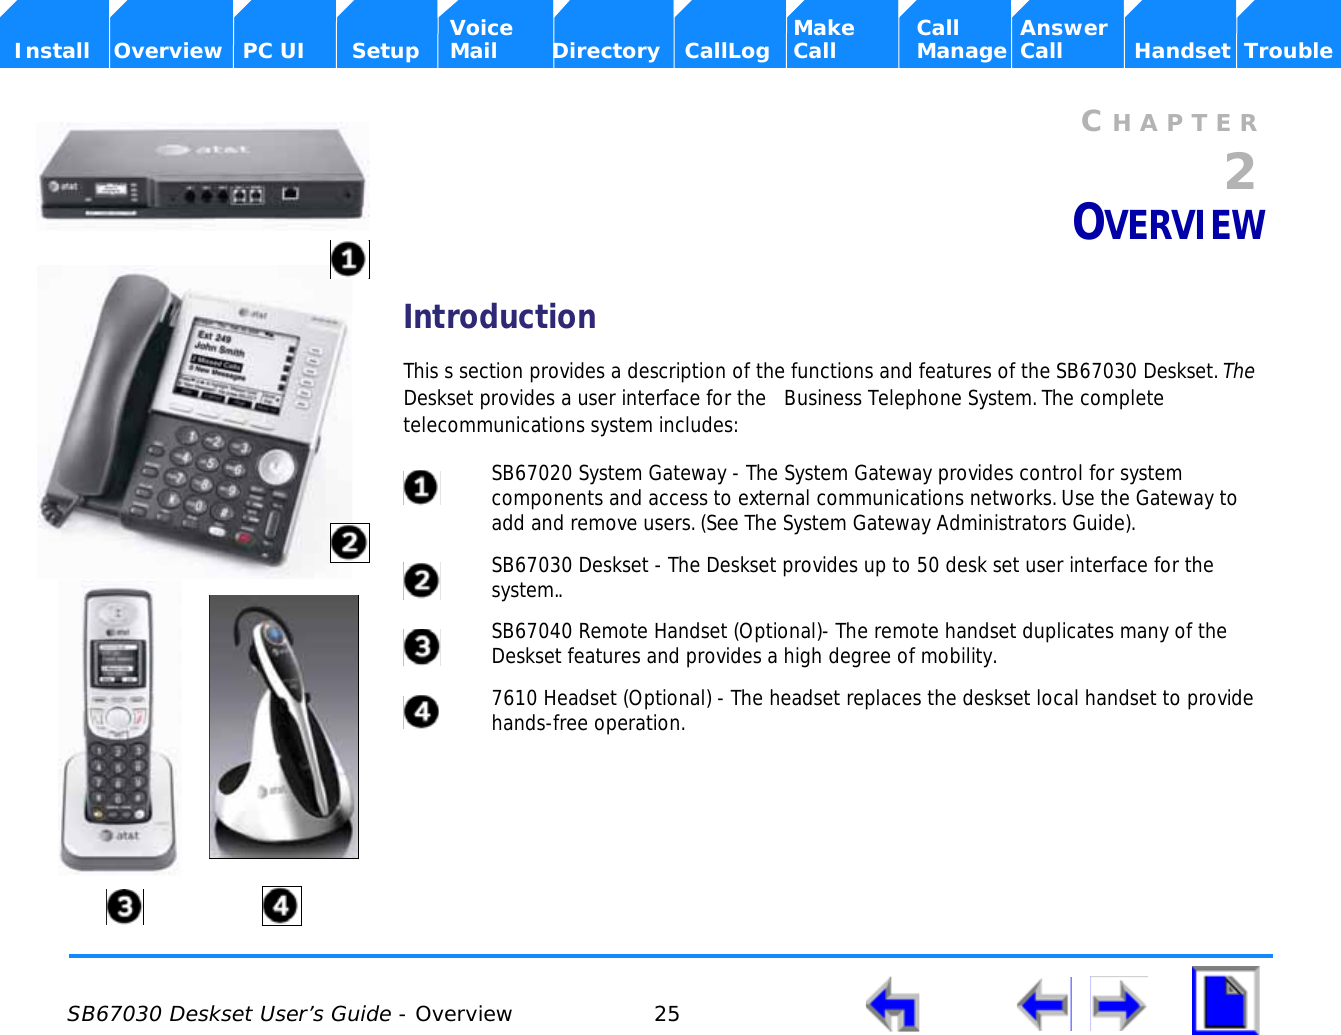  SB67030 Deskset User’s Guide - Overview 25    Voice Make Call Answer  Install Overview PC UI Setup Mail Directory CallLog Call Manage Call Handset TroubleCHAPTER2OVERVIEWIntroductionThis s section provides a description of the functions and features of the SB67030 Deskset. The Deskset provides a user interface for the   Business Telephone System. The complete telecommunications system includes:SB67020 System Gateway - The System Gateway provides control for system components and access to external communications networks. Use the Gateway to add and remove users. (See The System Gateway Administrators Guide).SB67030 Deskset - The Deskset provides up to 50 desk set user interface for the system..SB67040 Remote Handset (Optional)- The remote handset duplicates many of the Deskset features and provides a high degree of mobility.7610 Headset (Optional) - The headset replaces the deskset local handset to provide hands-free operation. 